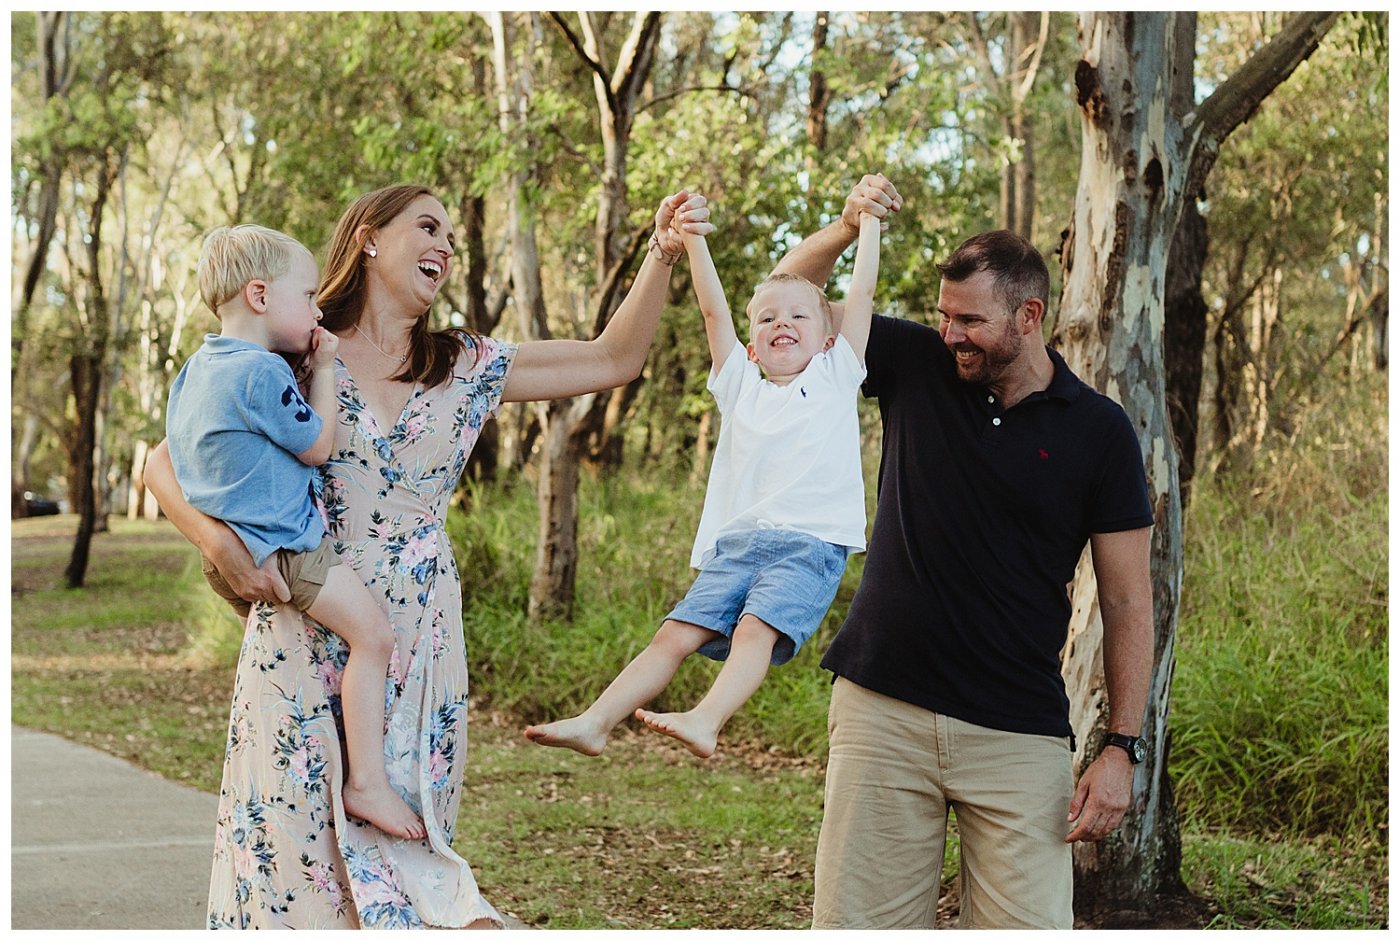 Outdoor-family-photo-session-in-Brisbane